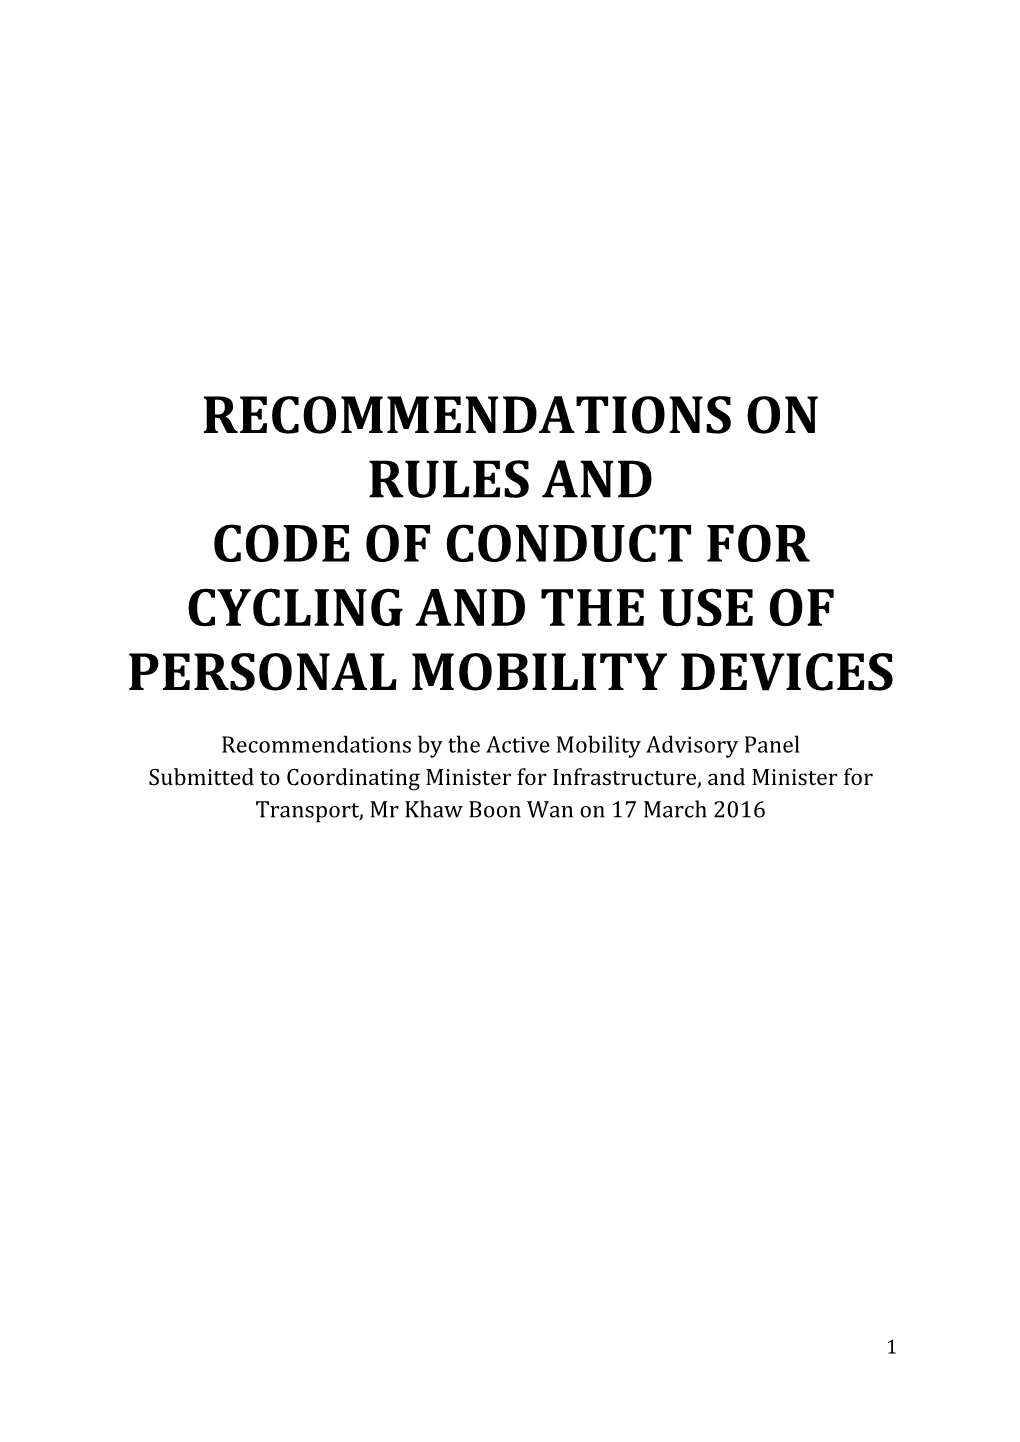 Recommendations on Rules and Code of Conduct for Cycling and the Use of Personal Mobility Devices